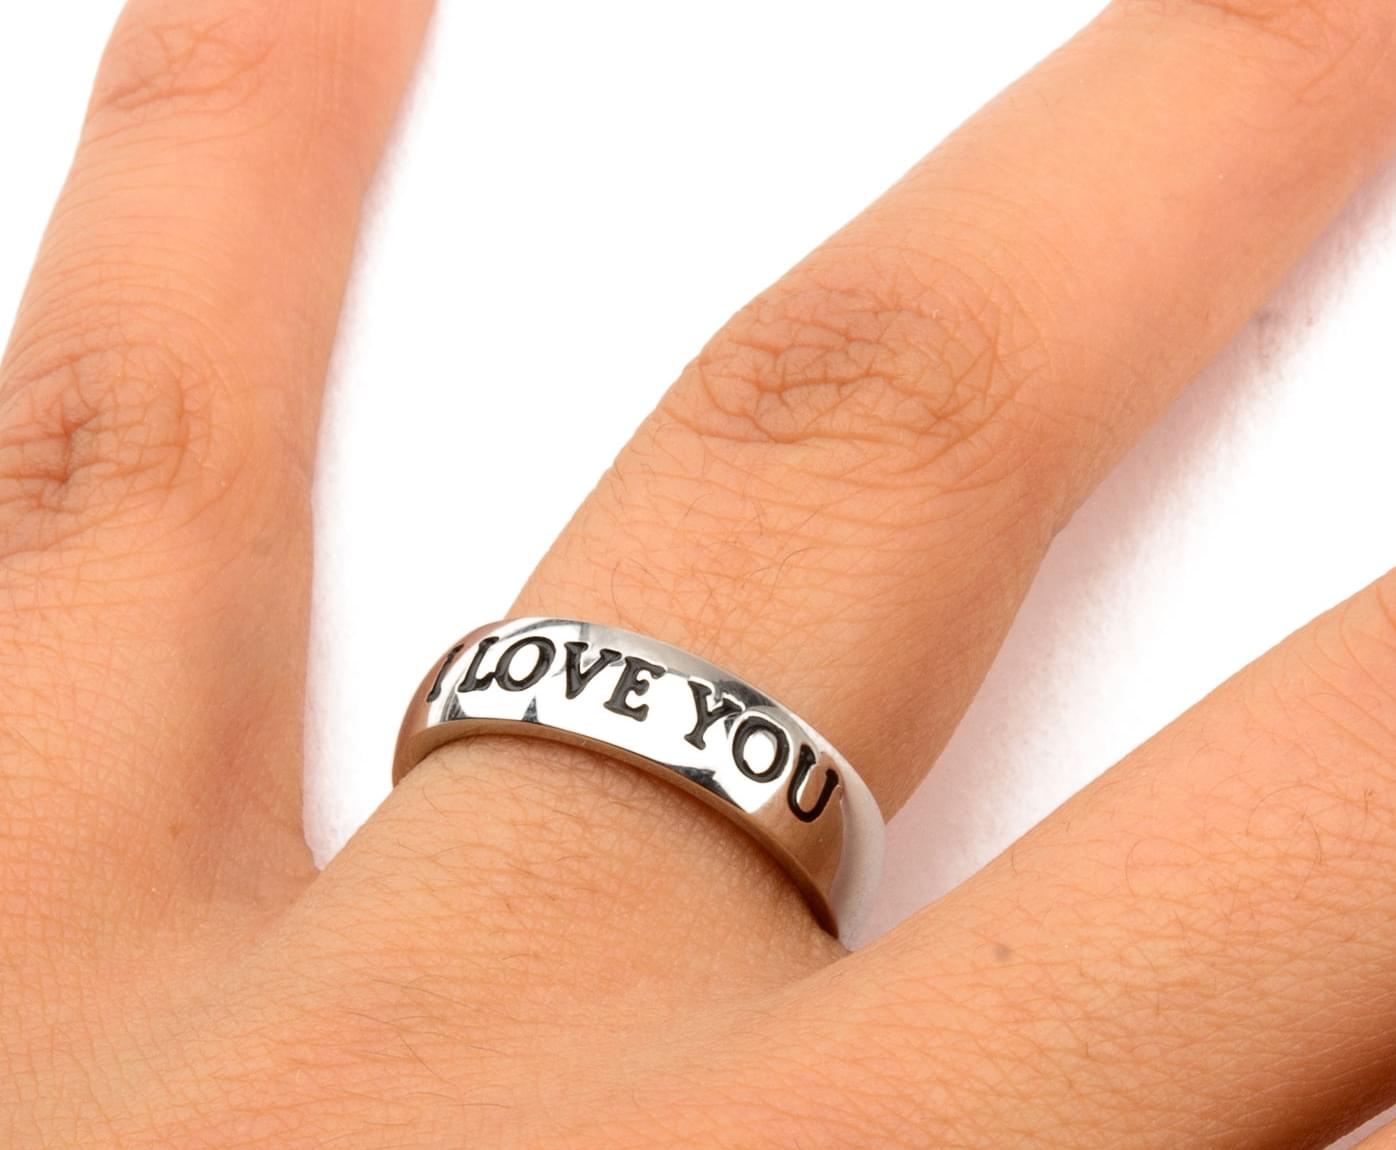 Star Wars I Love You Stainless Steel Unisex Ring | Size 6 - image 3 of 3